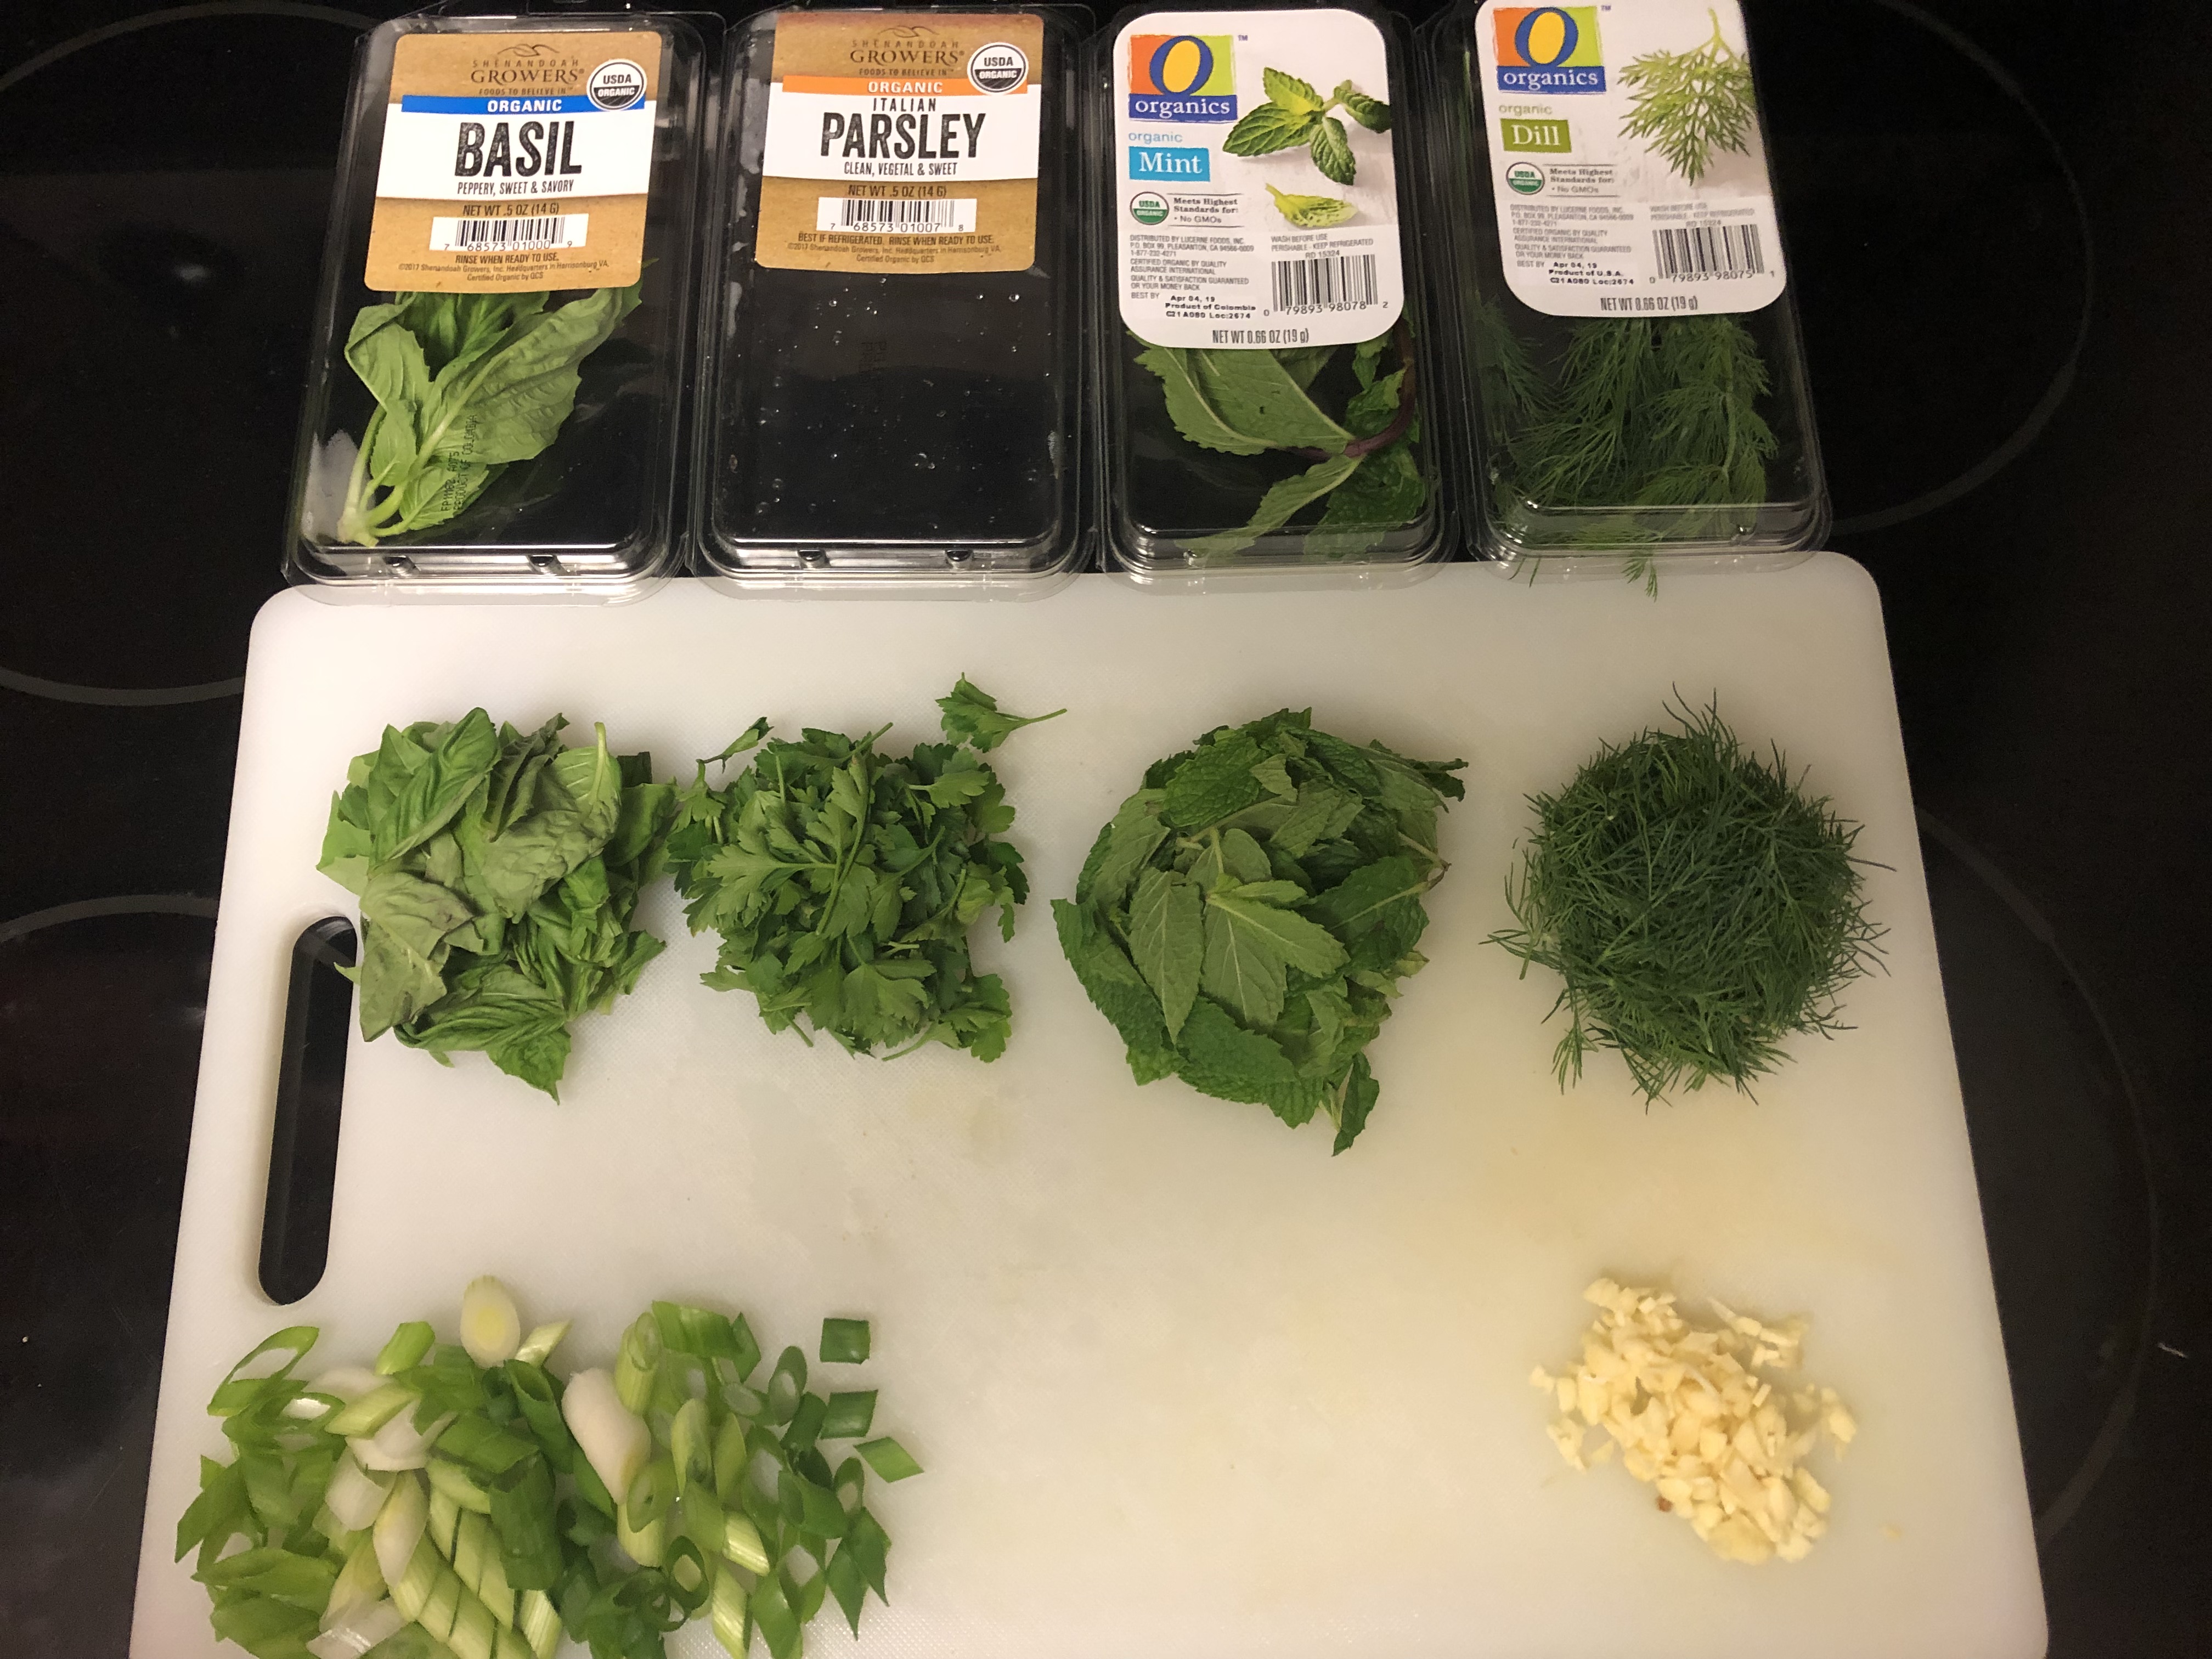 Ingredients prepped on cutting board with ingredients in front of their respective packages for labeling